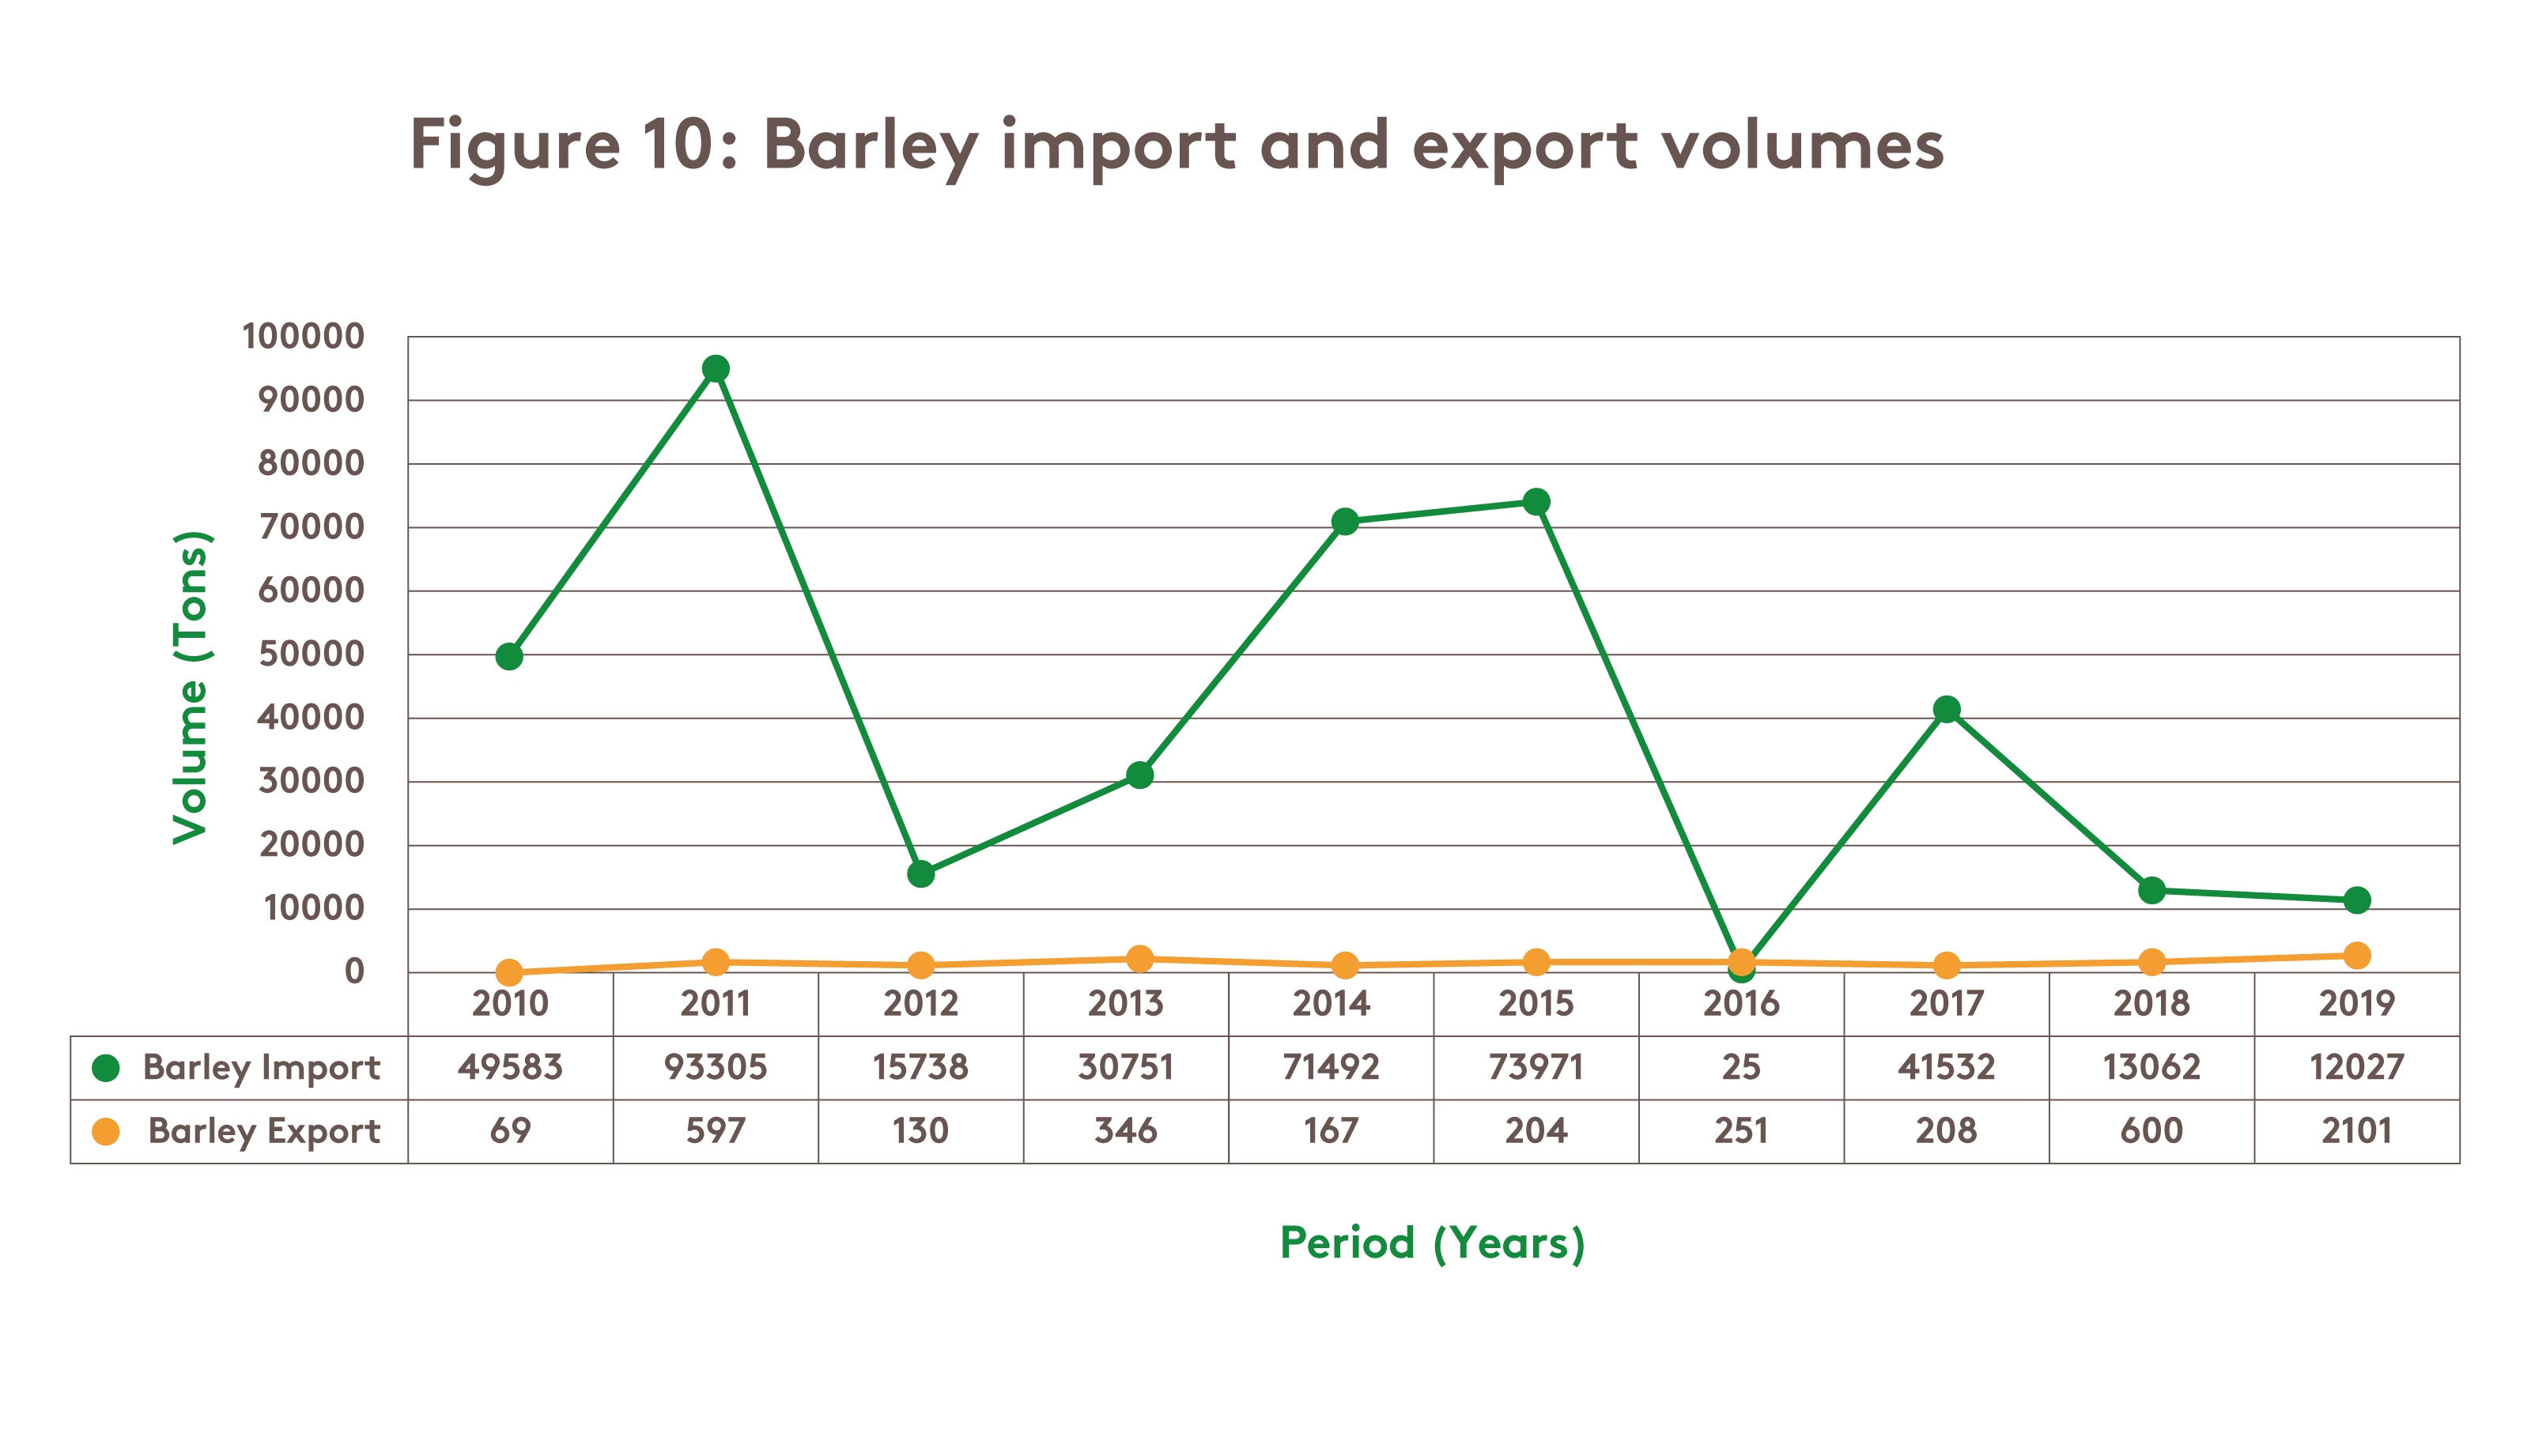 Barley import and export volumes 2010 to 2019 for South Africa